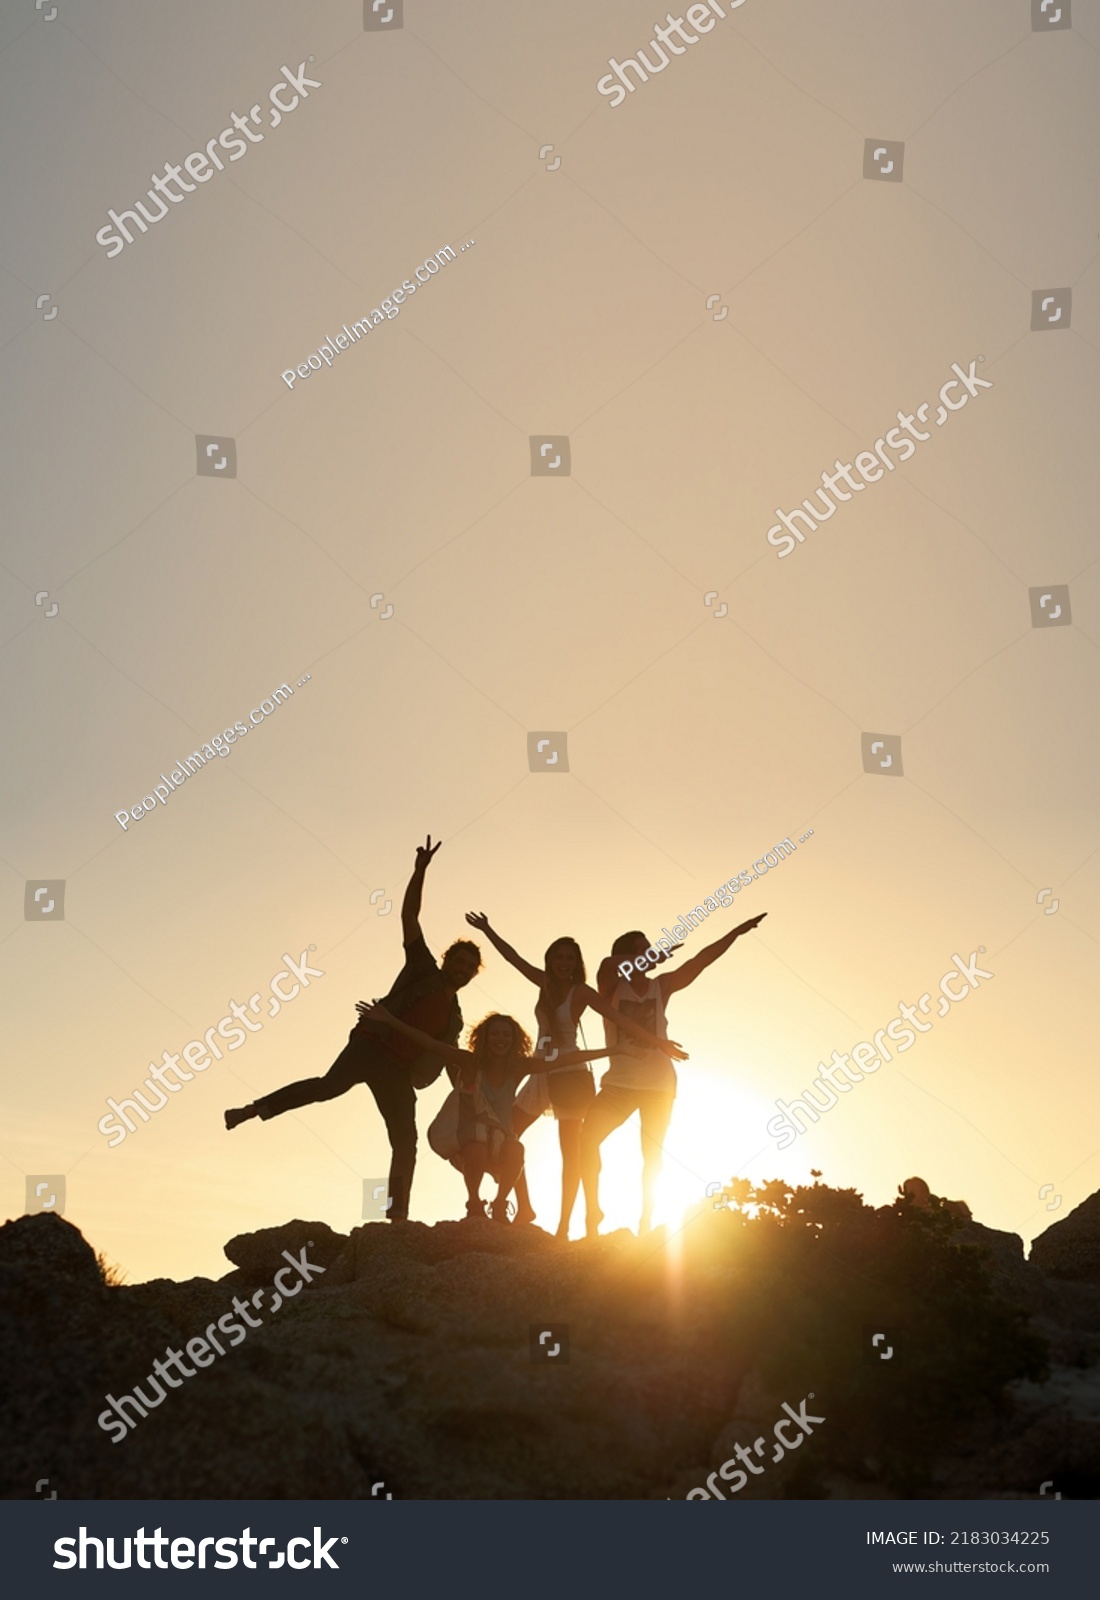 Group of friends posing standing on rocks at sunset having fun summer vacation lifestyle celebrating friendship #2183034225